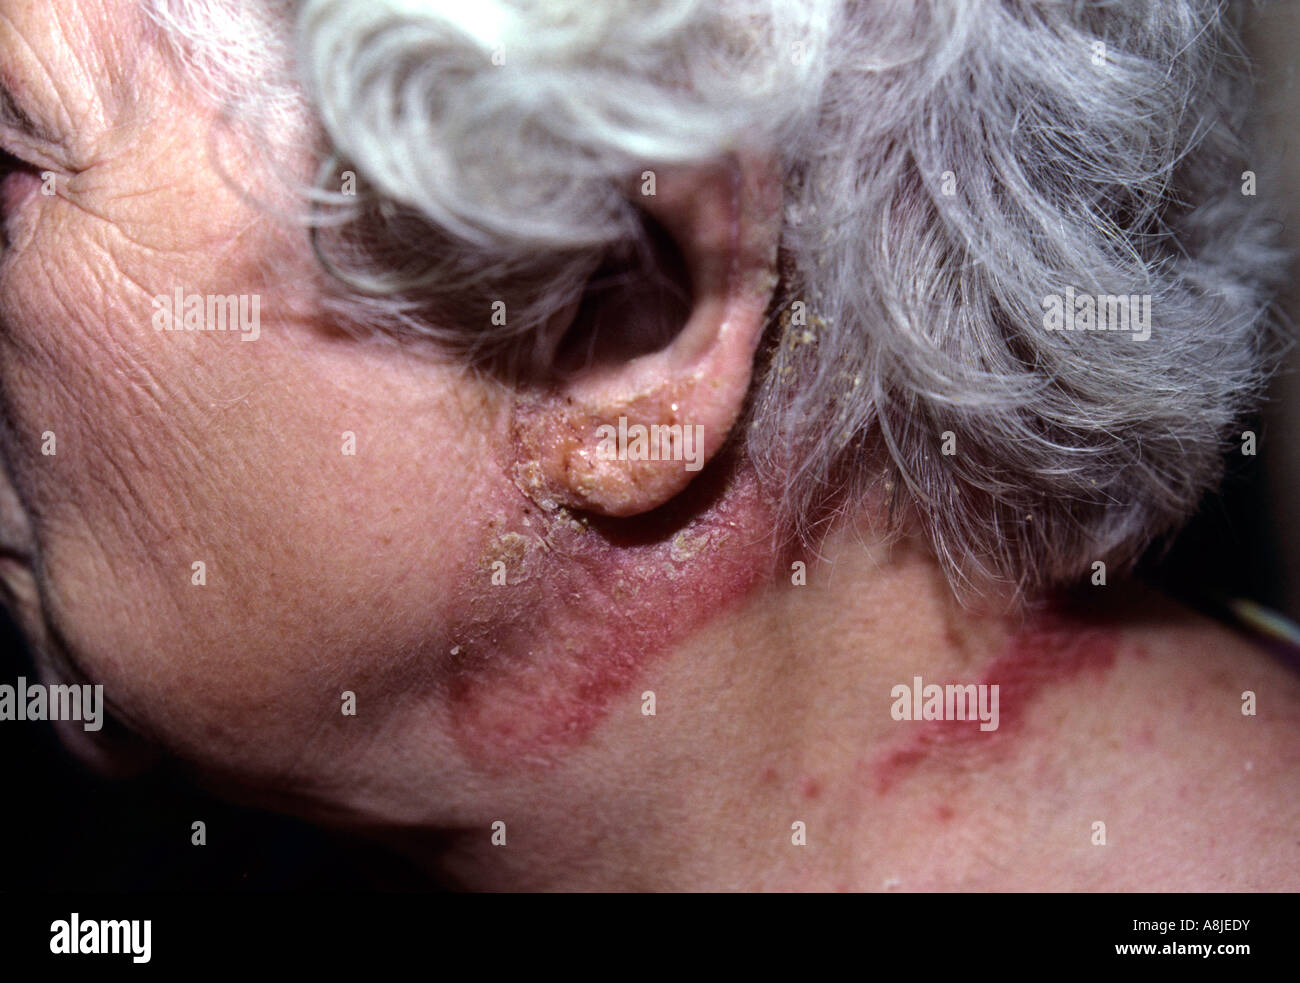 Allergy to clothing. Rash appears on patient's neck. Stock Photo